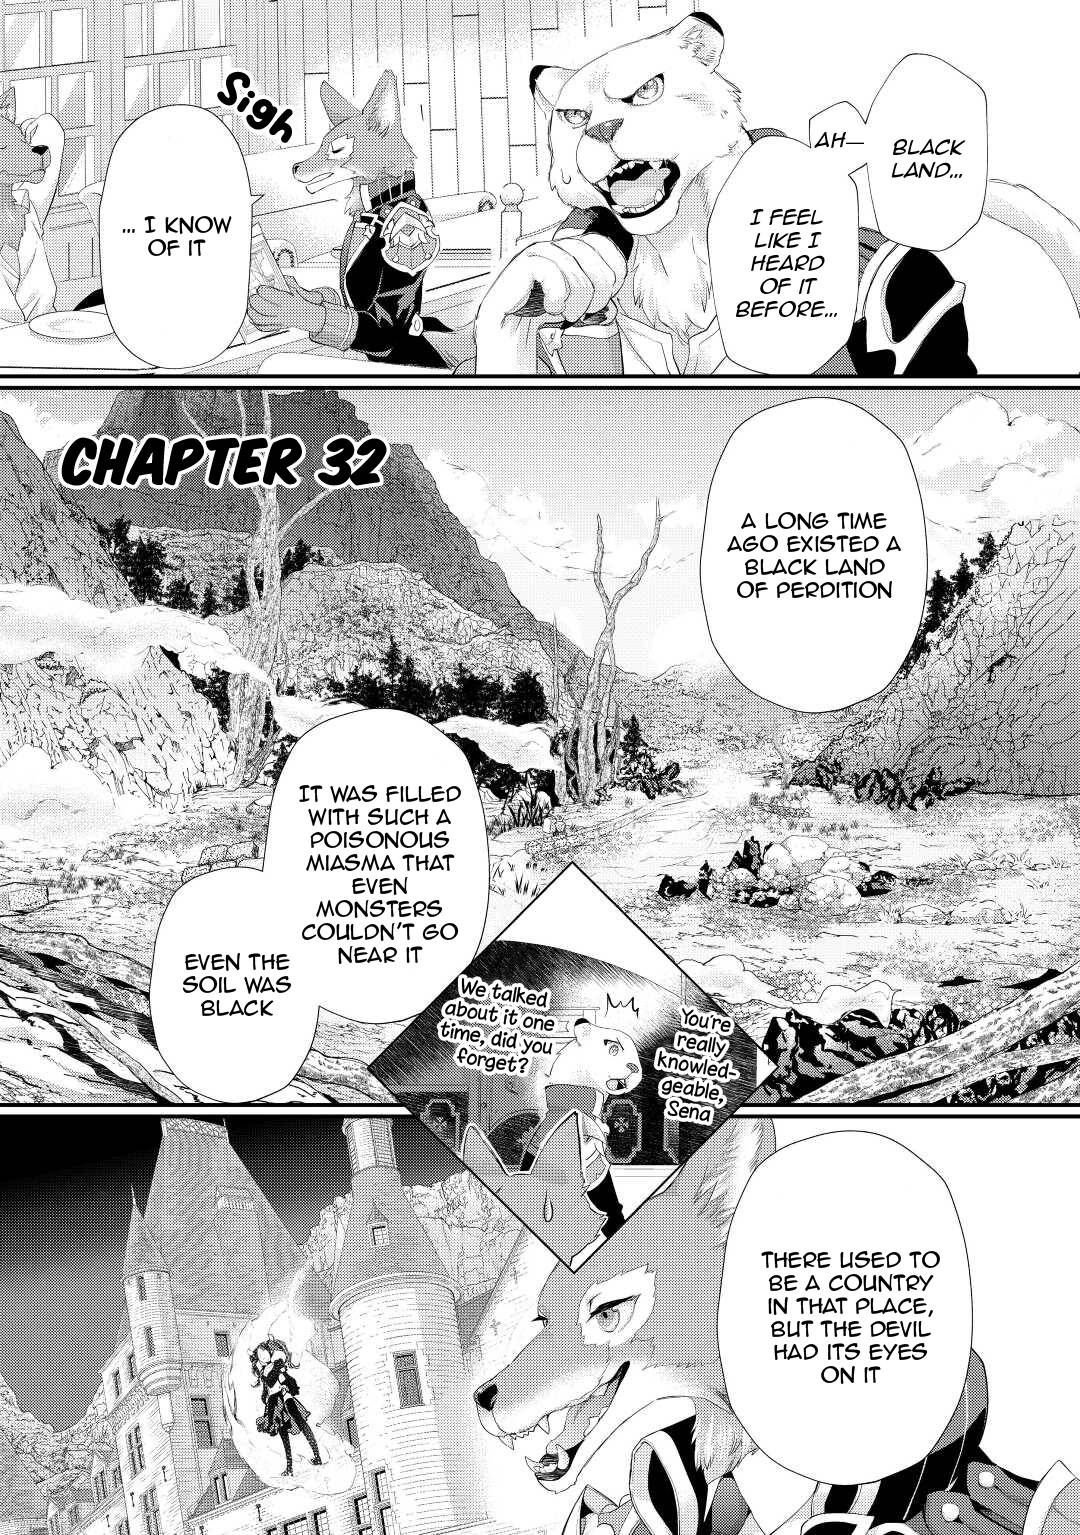 Milady Just Wants to Relax - chapter 32 - #2